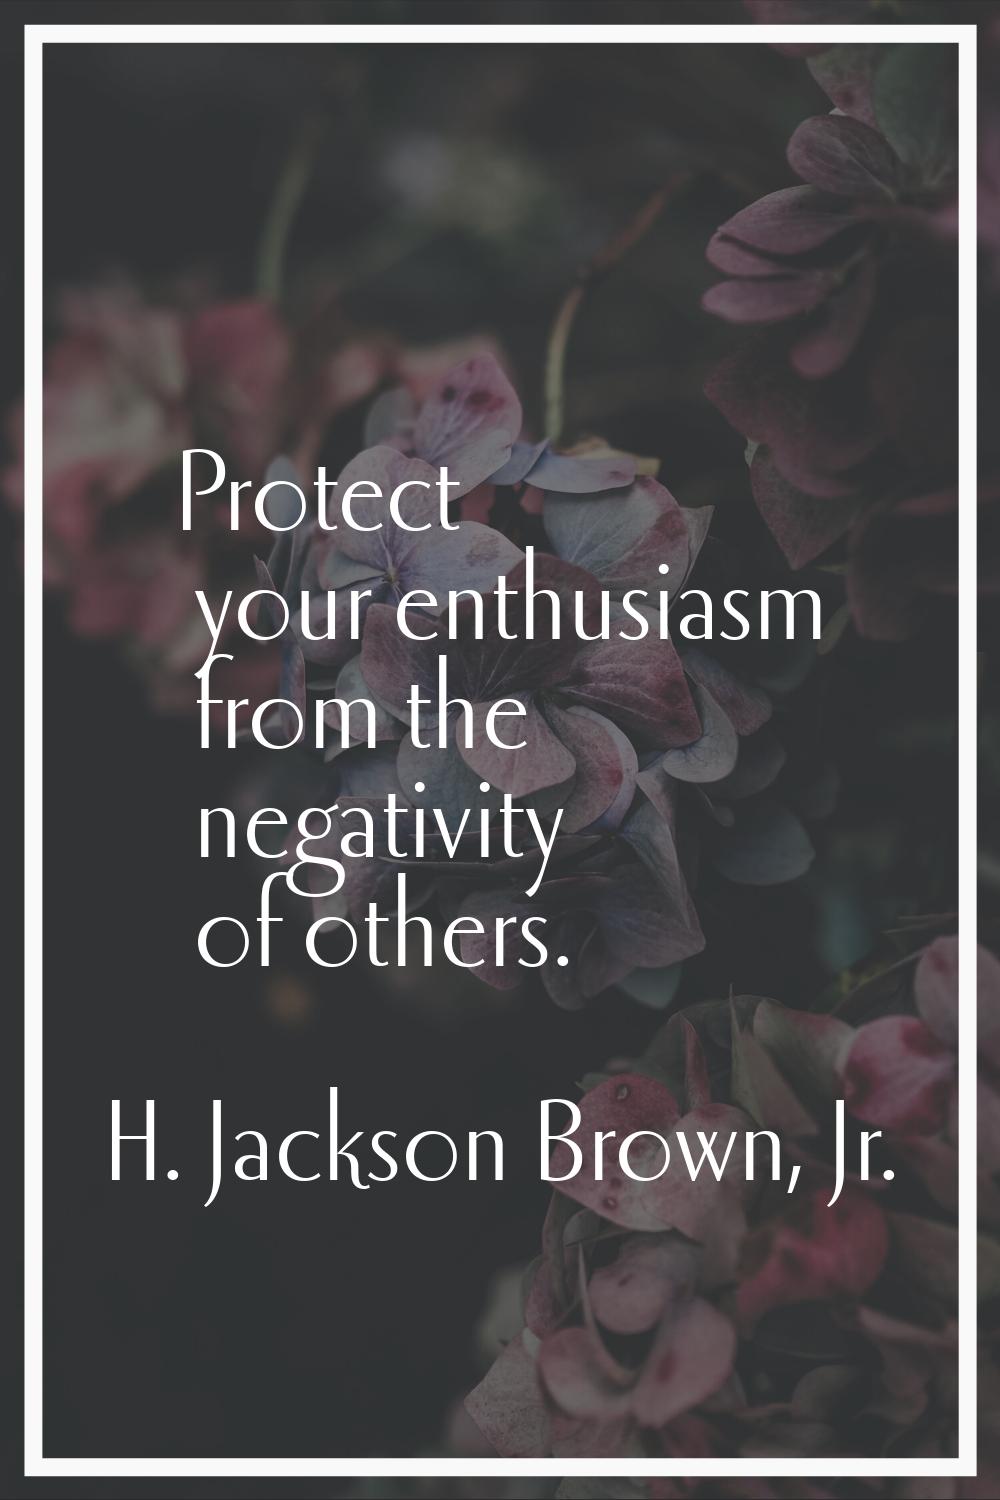 Protect your enthusiasm from the negativity of others.